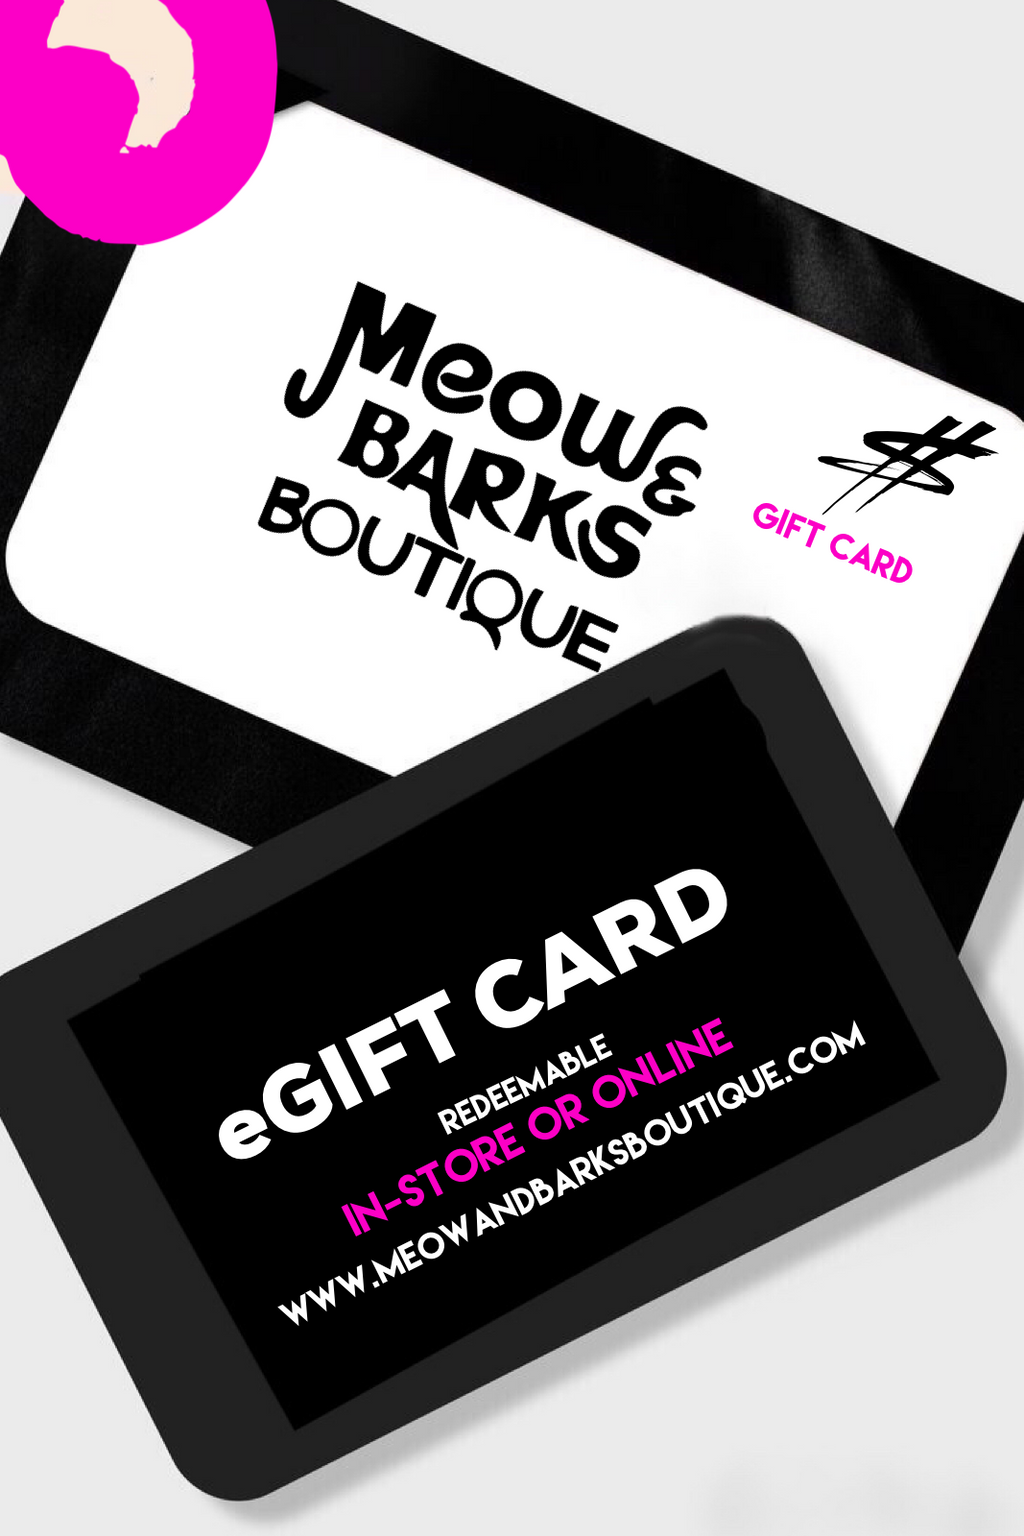 Meow and Barks Boutique Gift Card